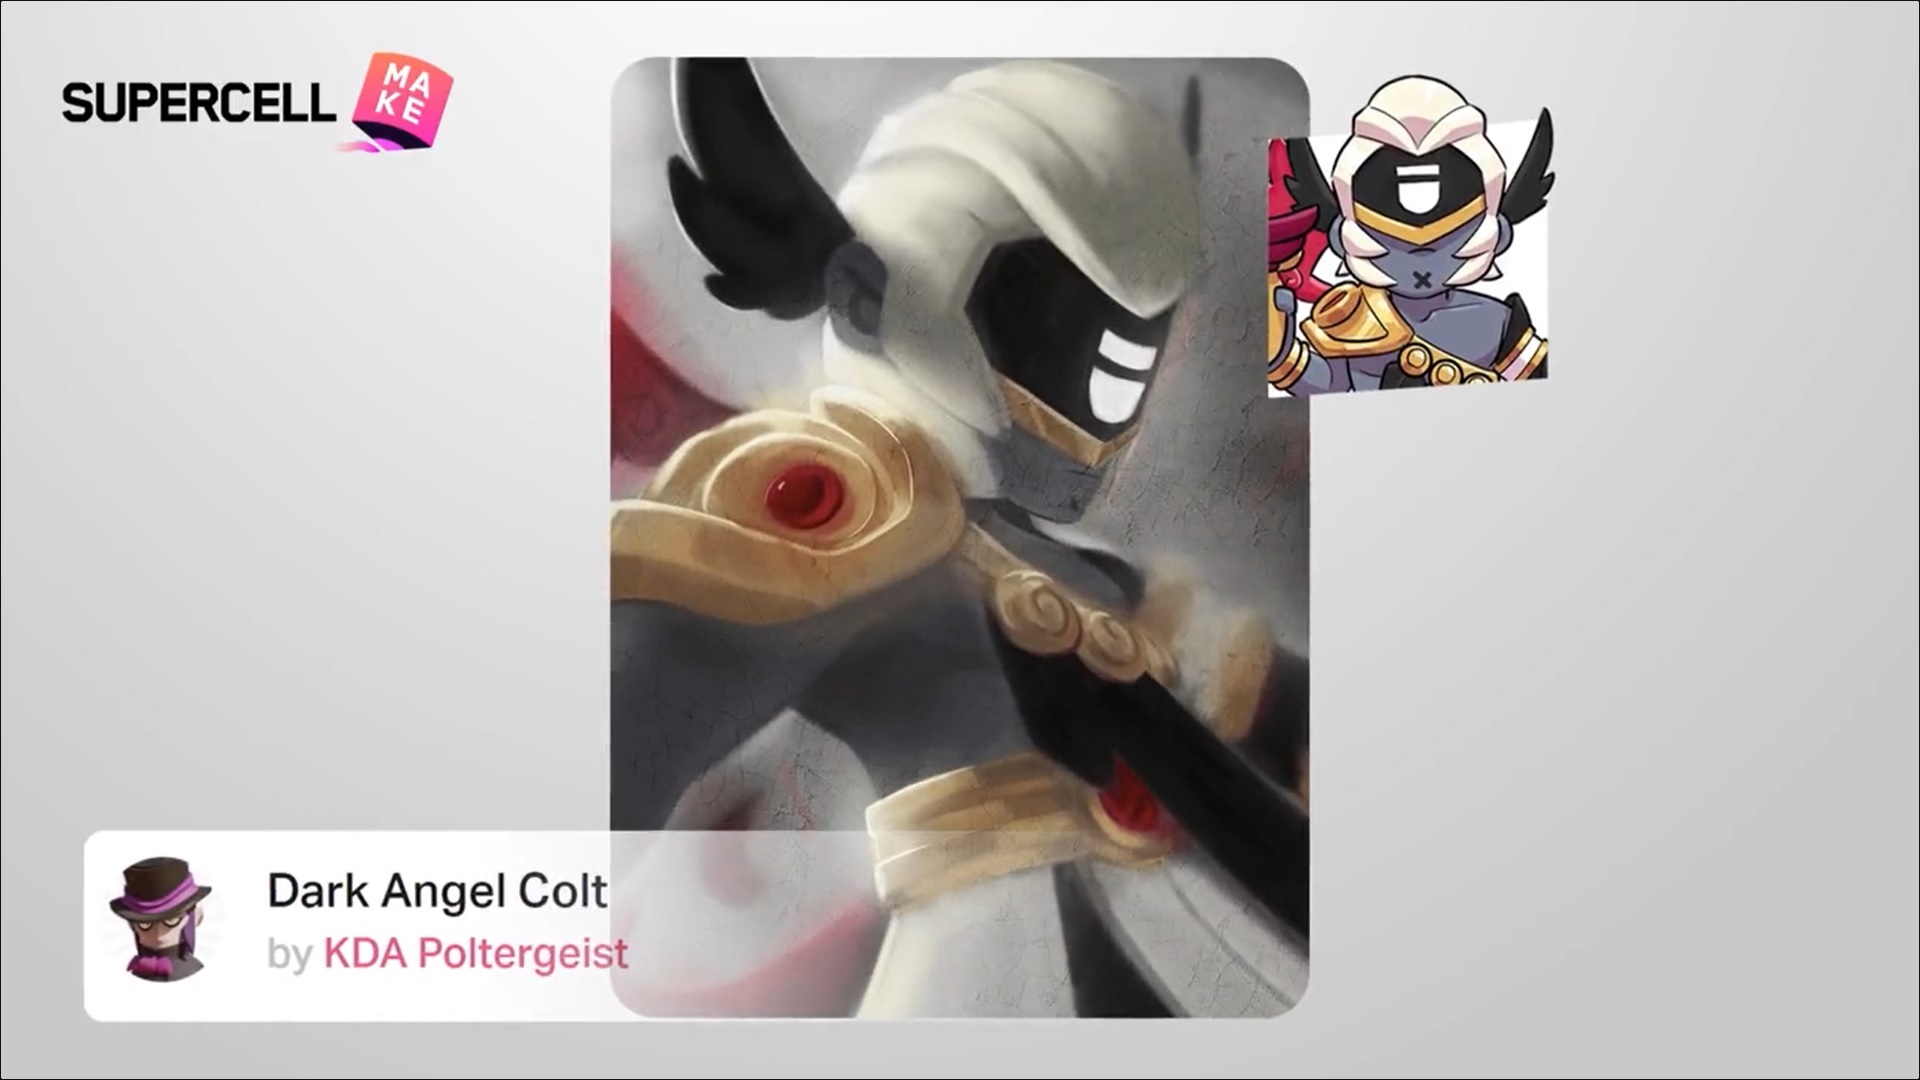 Brawl Stars - Justice is now restored as Dark Angel Colt descends from the  heavens 👼🏼 🪽Dark Angel Colt is now available for FREE for everyone until  the end of the year!